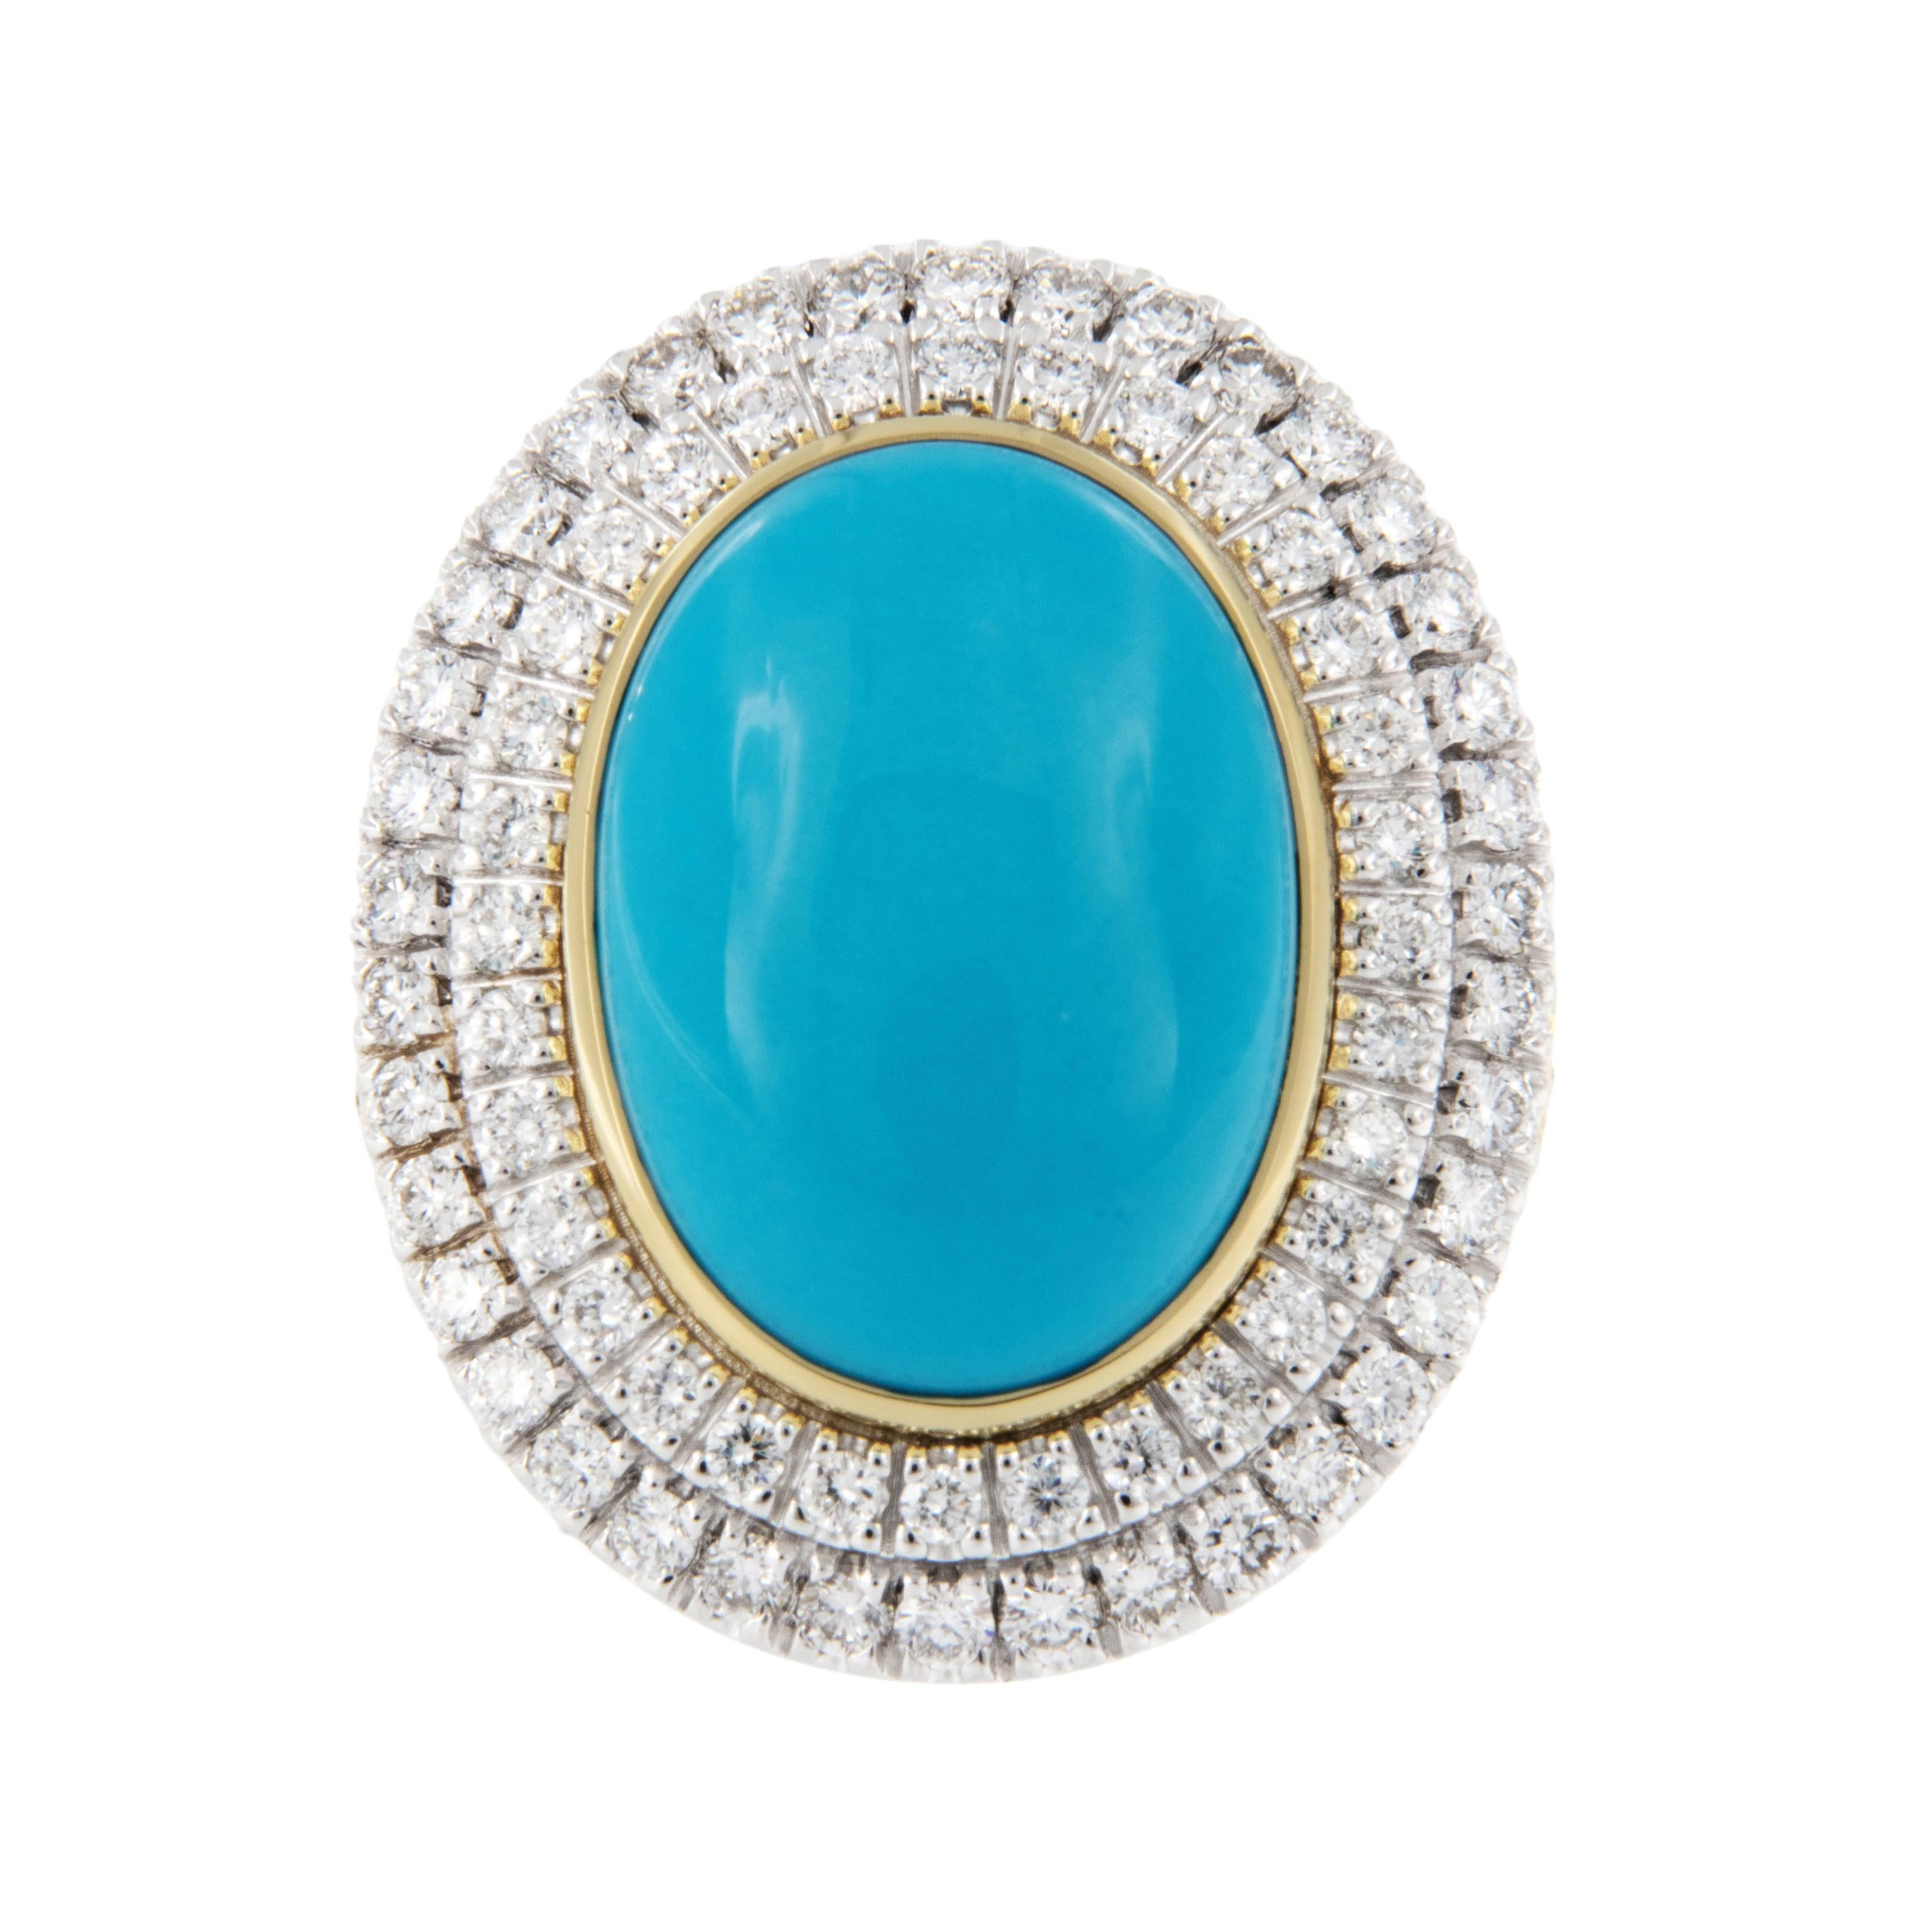 People the world over have revered turquoise as a good luck stone for centuries. Blue as the summer sky or a robin’s egg, this stone has inspired many mystical associations. Made in Italy, this 18 karat yellow gold turquoise ring with oval extra